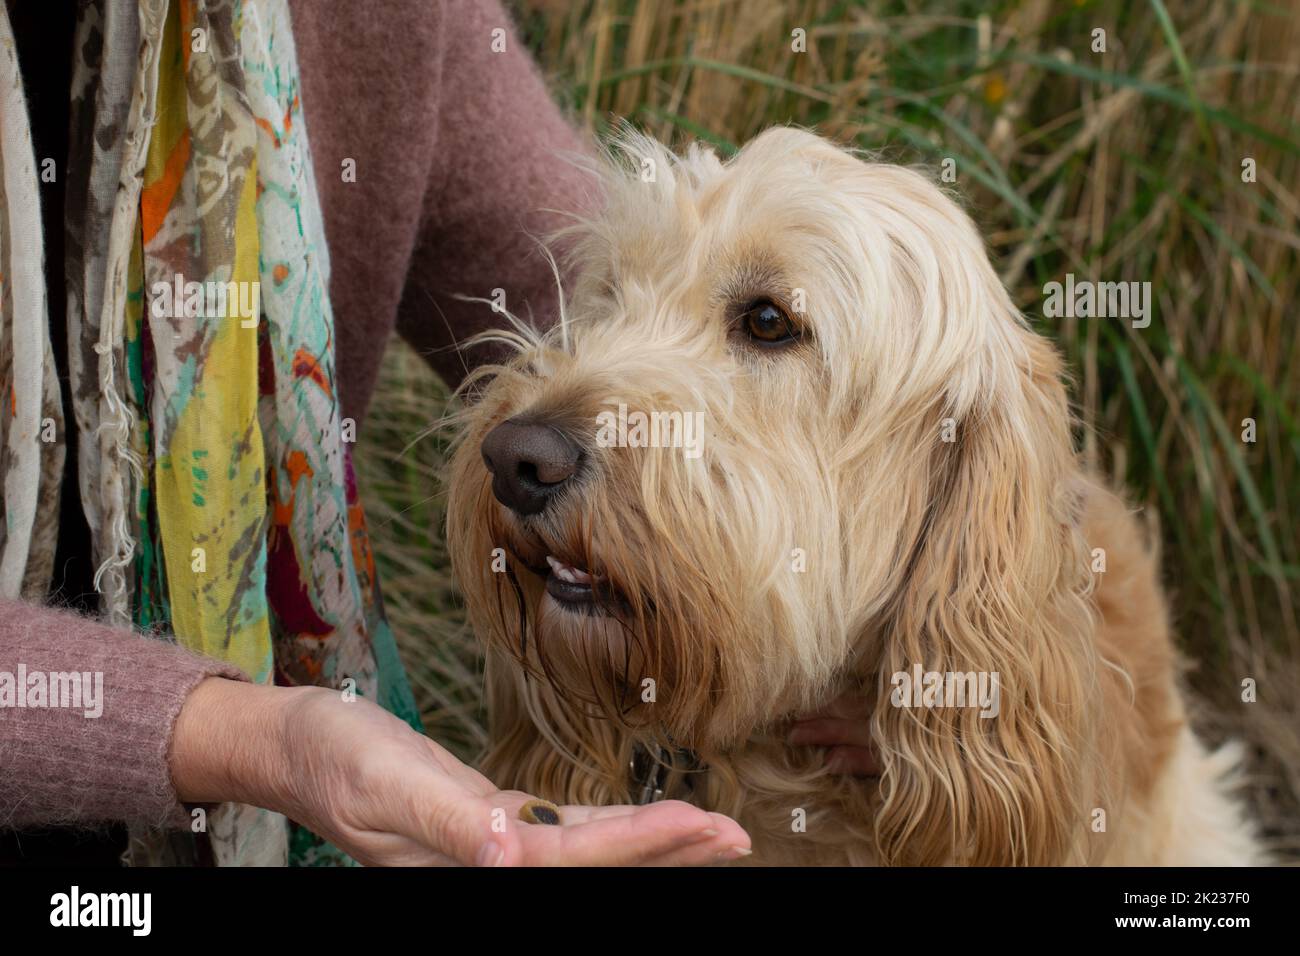 Distracted dog looking into distance with woman's  hand holding out treat Stock Photo